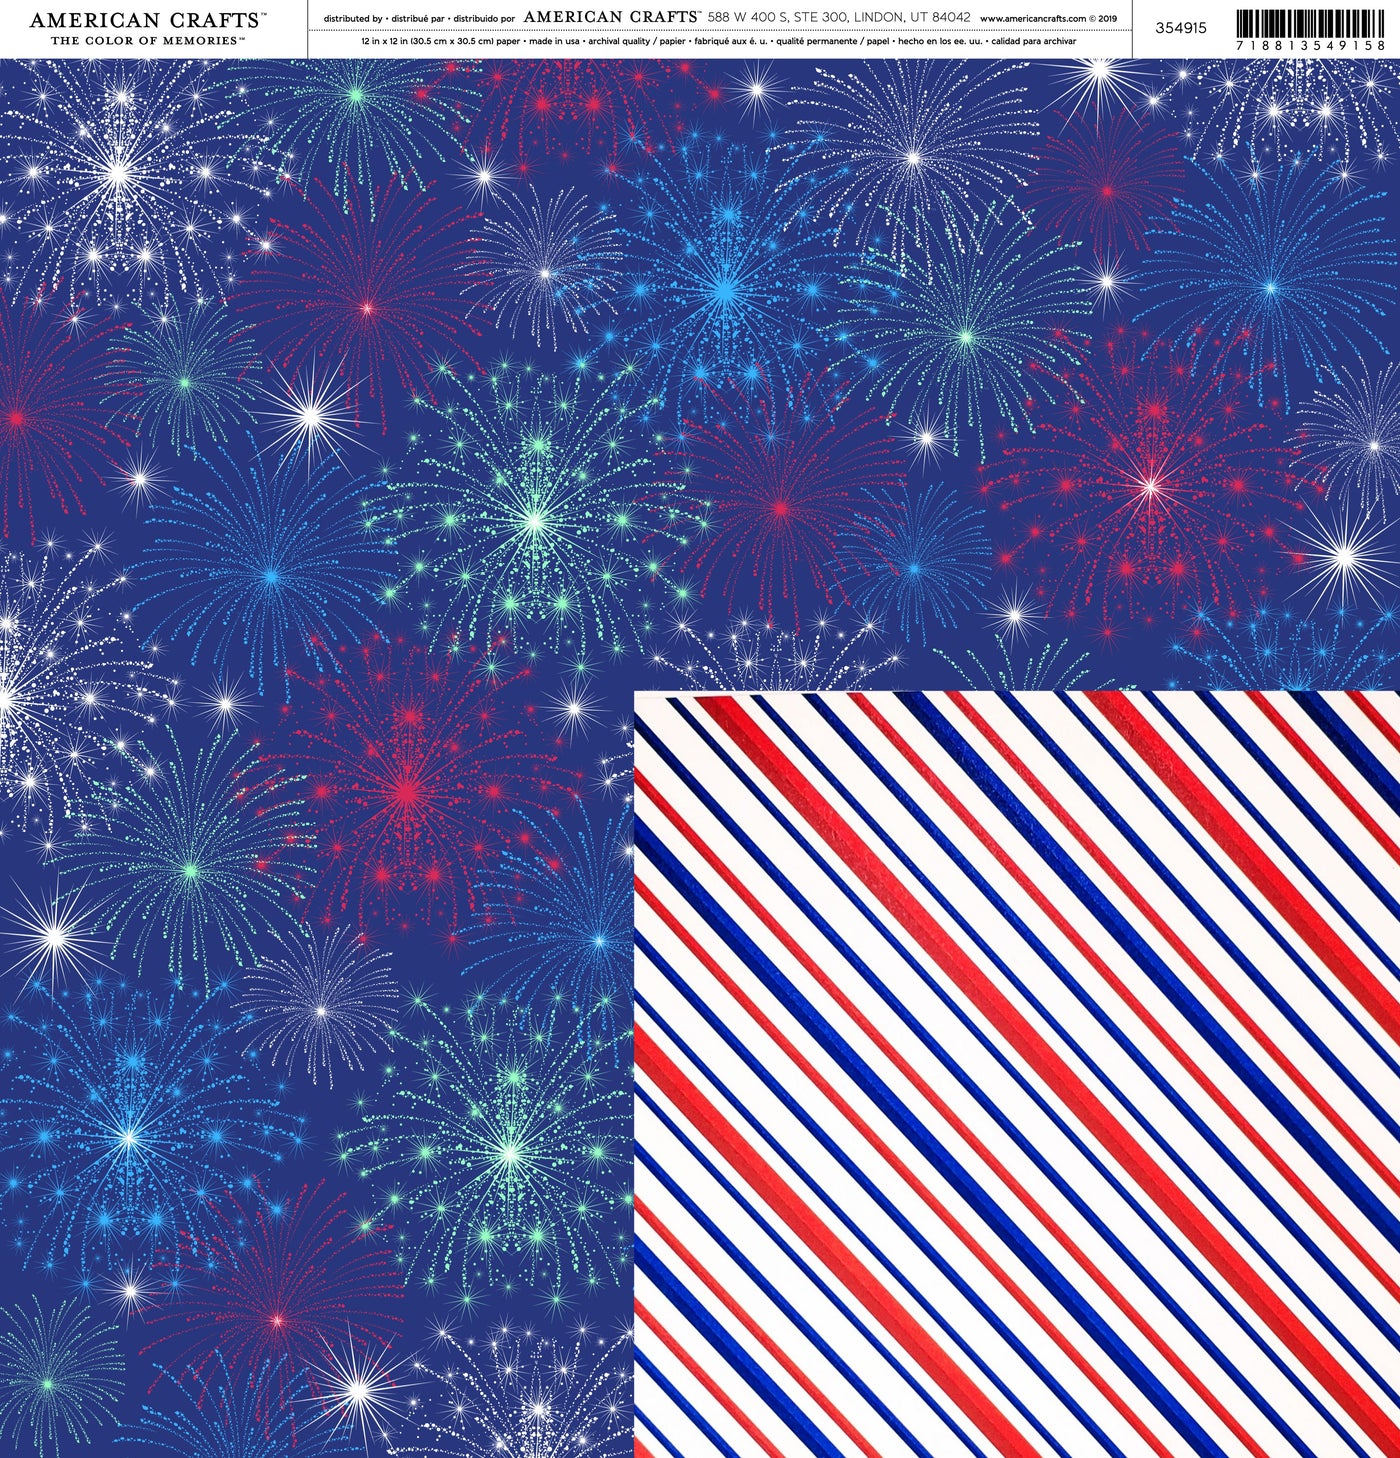 Multi-Colored (red, white, and blue fireworks on a navy blue background)